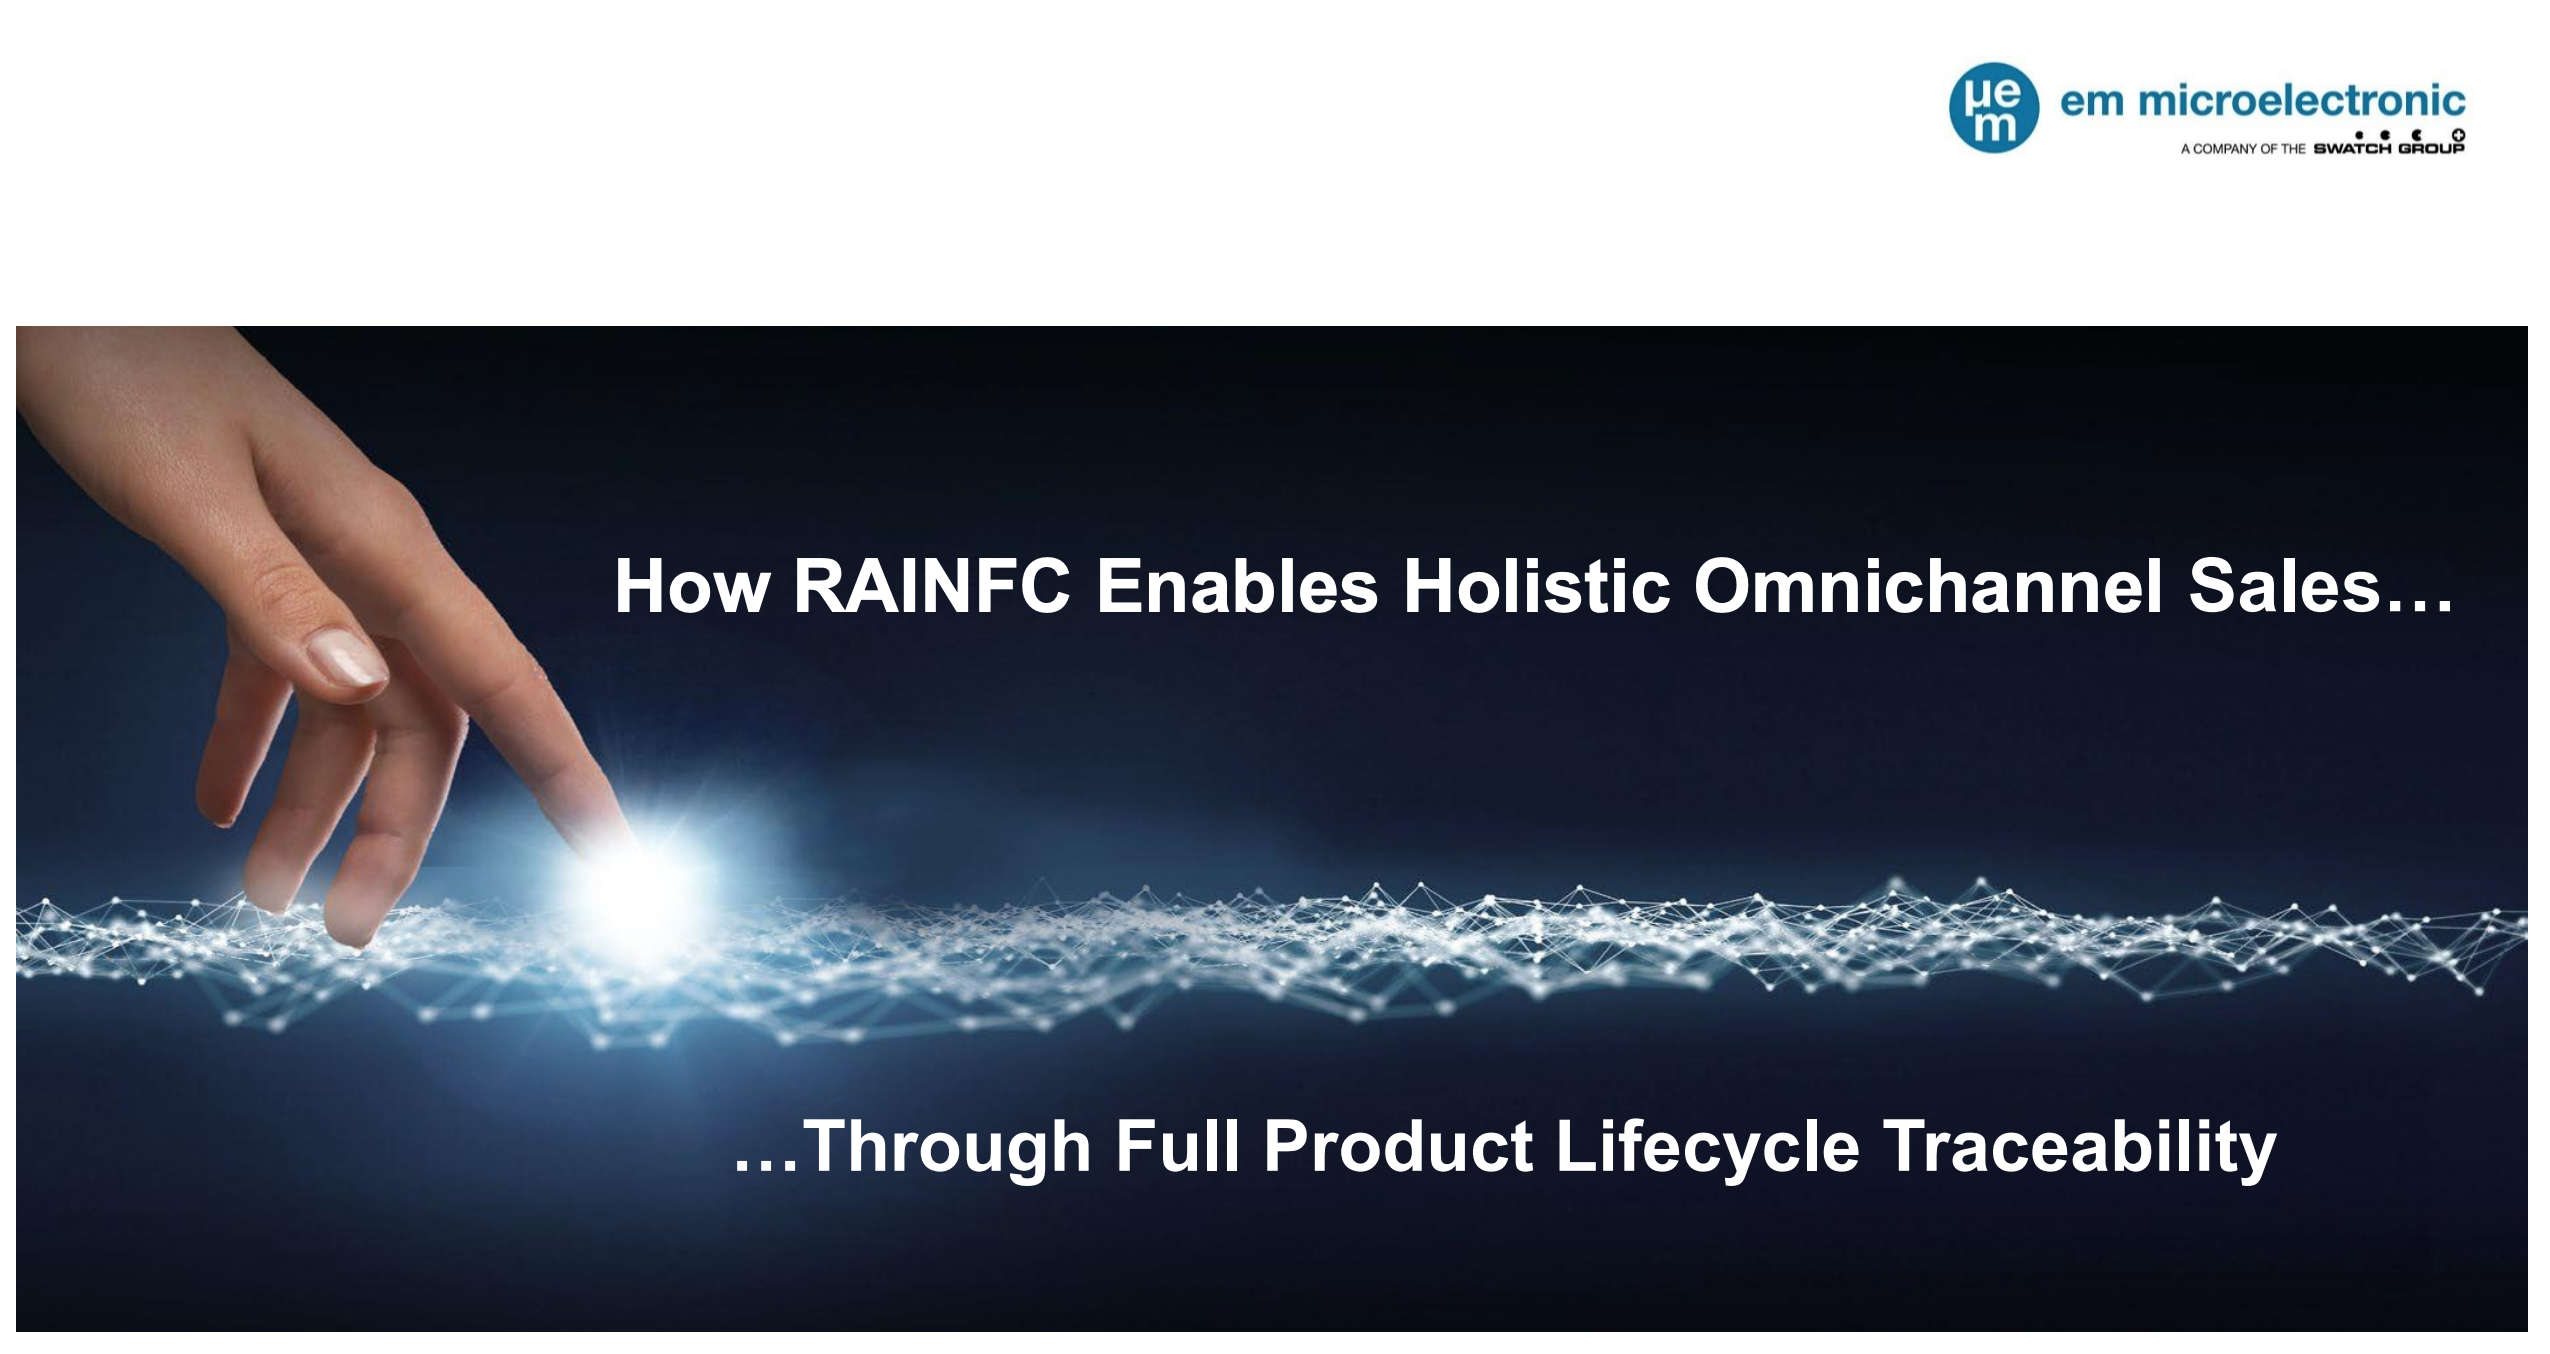 How RAINFC Enables Holistic Omnichannel Sales Through Full Product Lifecycle Traceability